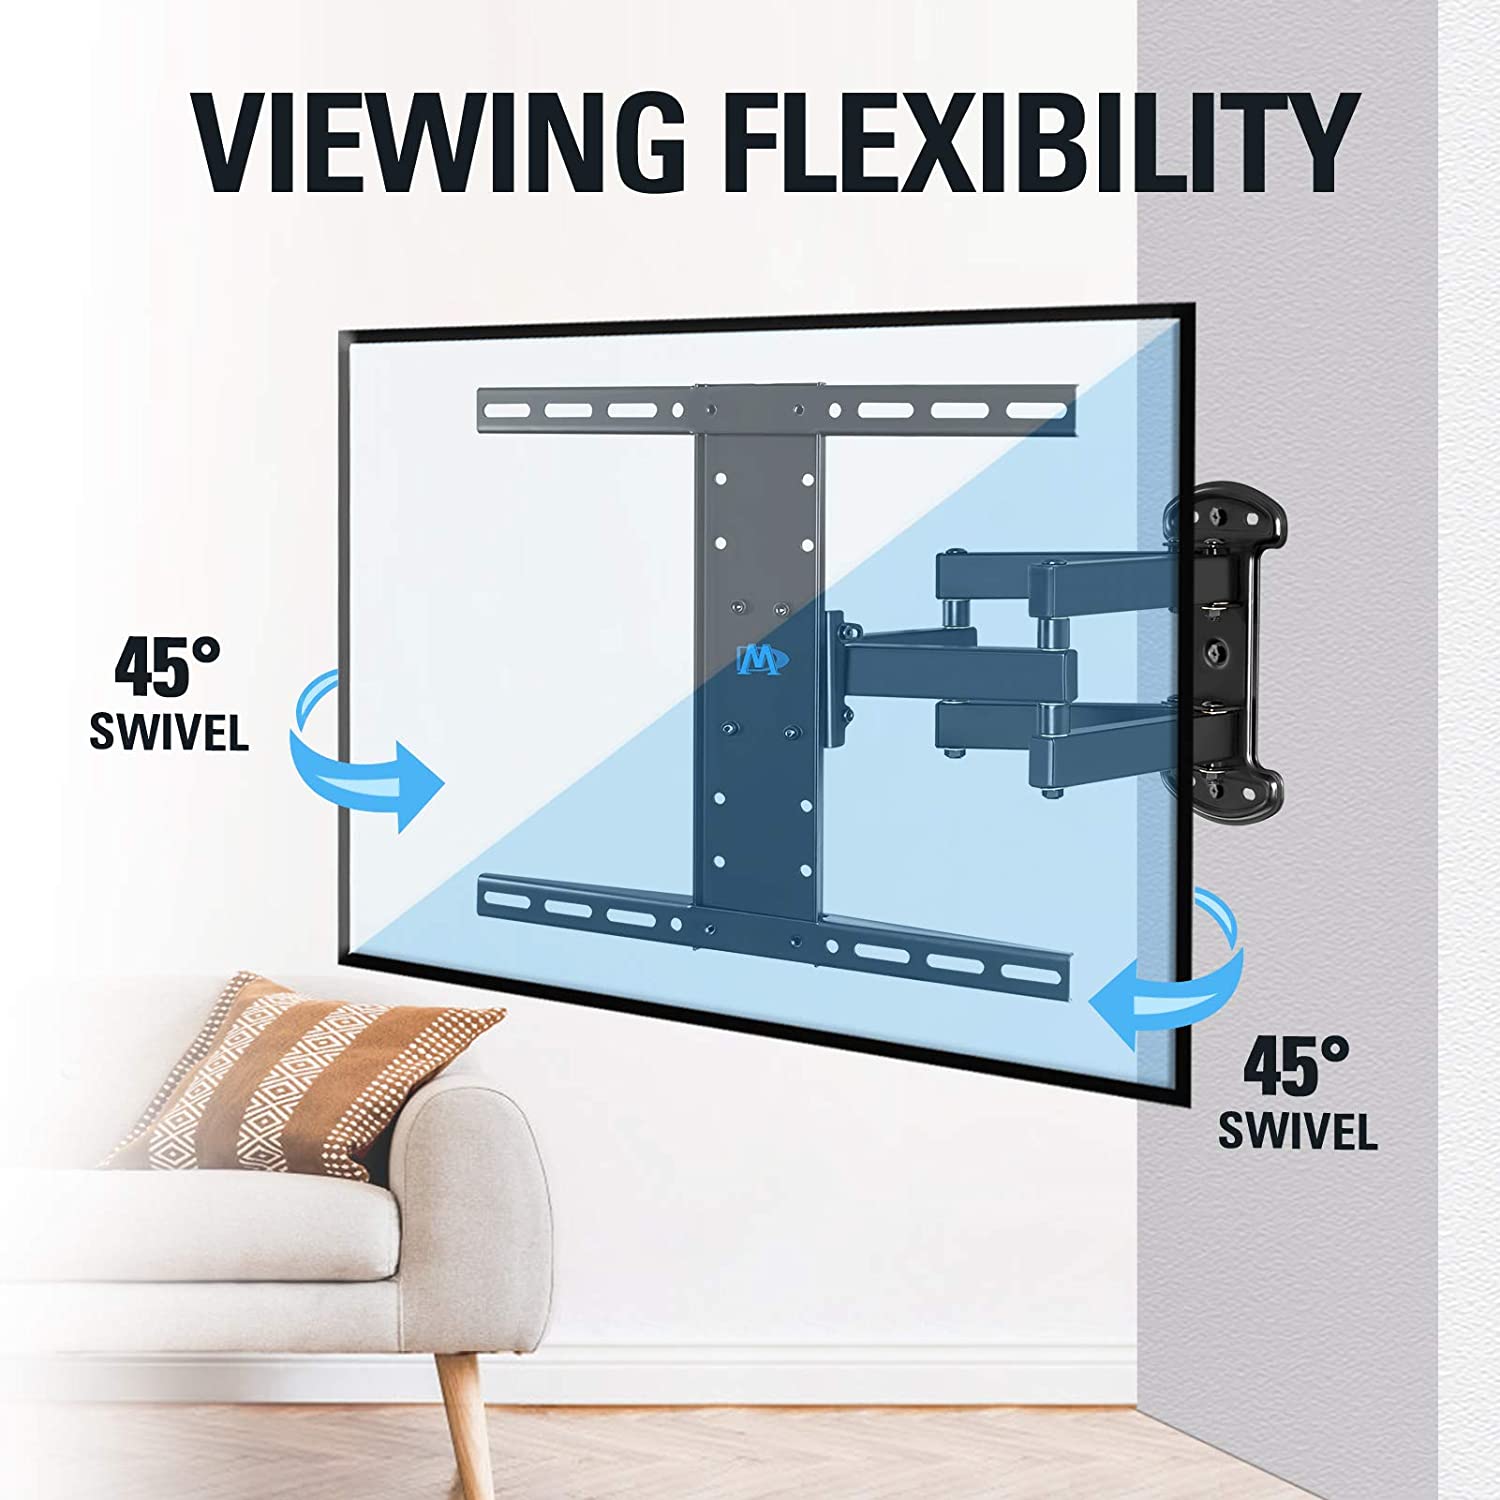 swivel TV mount for viewing flexibility